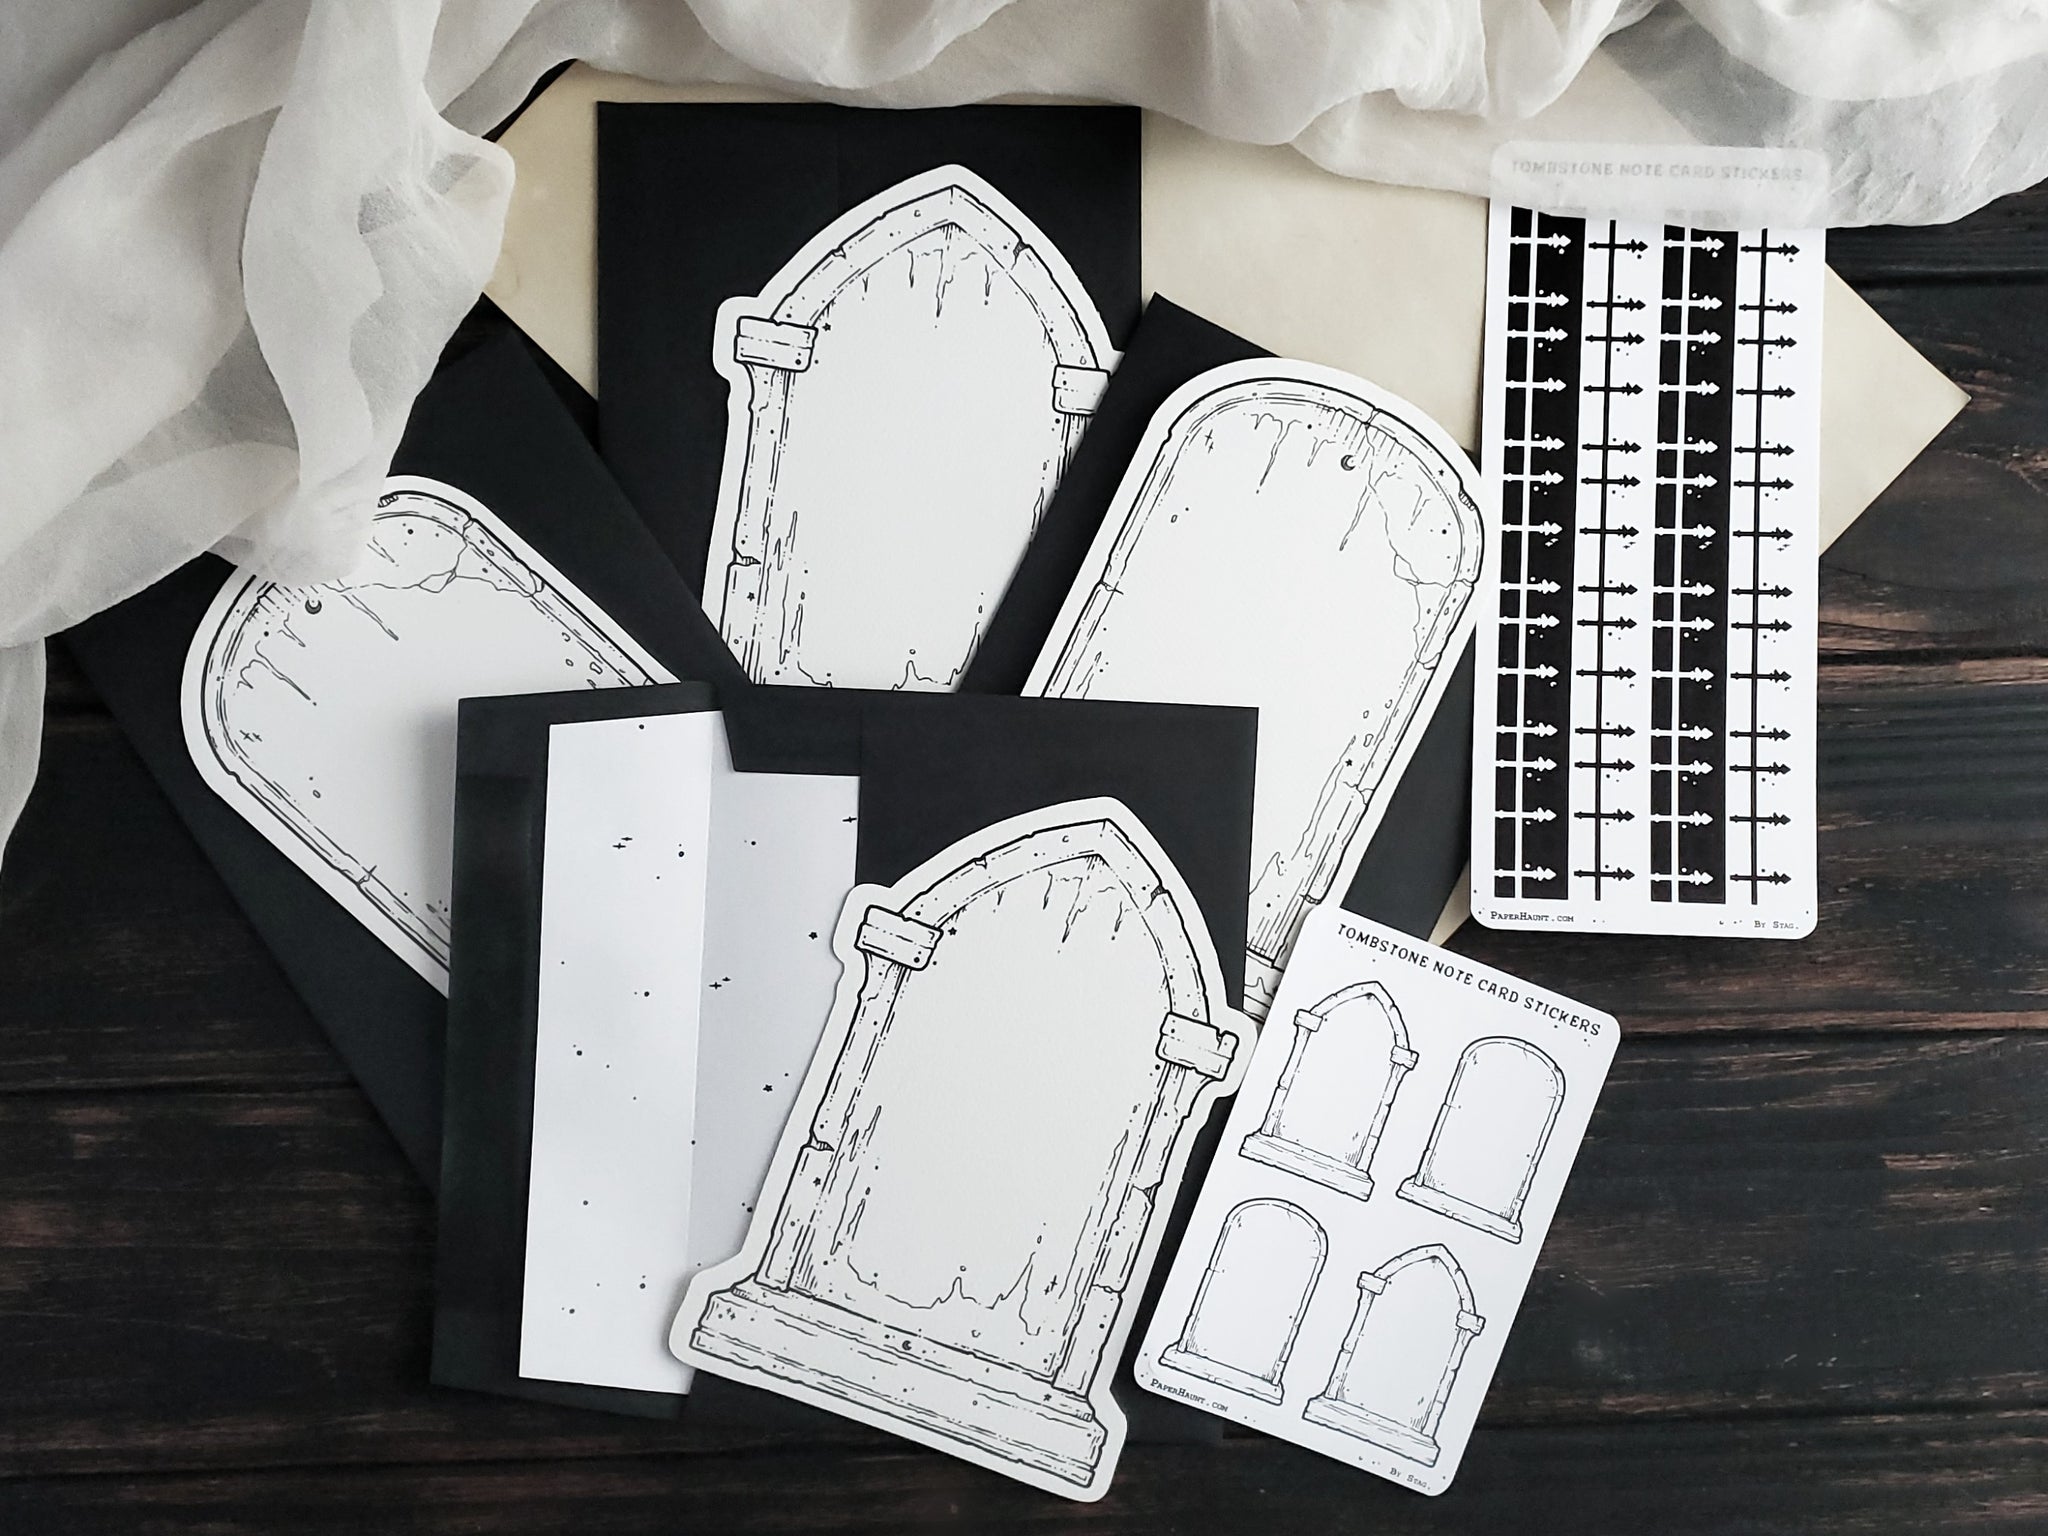 Tombstone Card SET